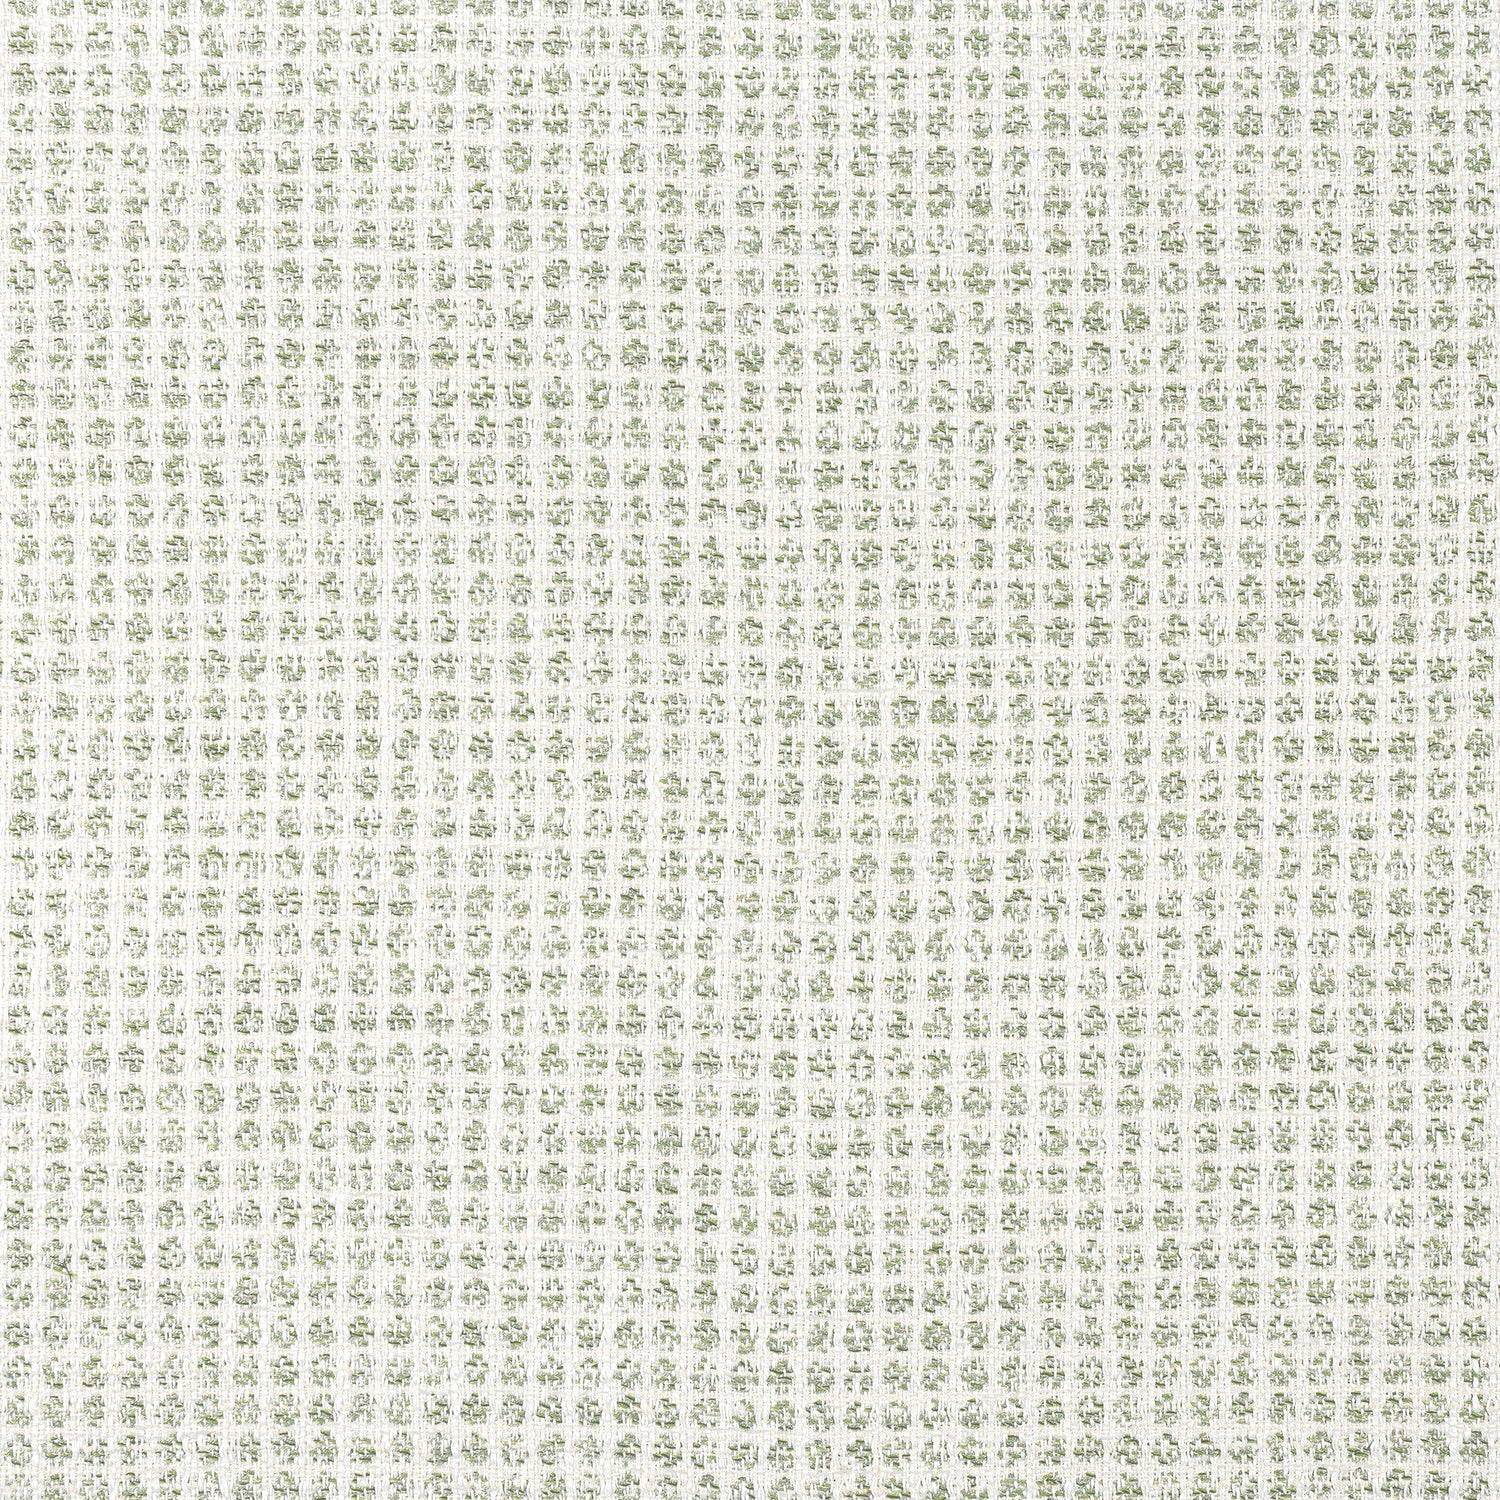 Remy Dot fabric in aloe color - pattern number W8703 - by Thibaut in the Haven collection